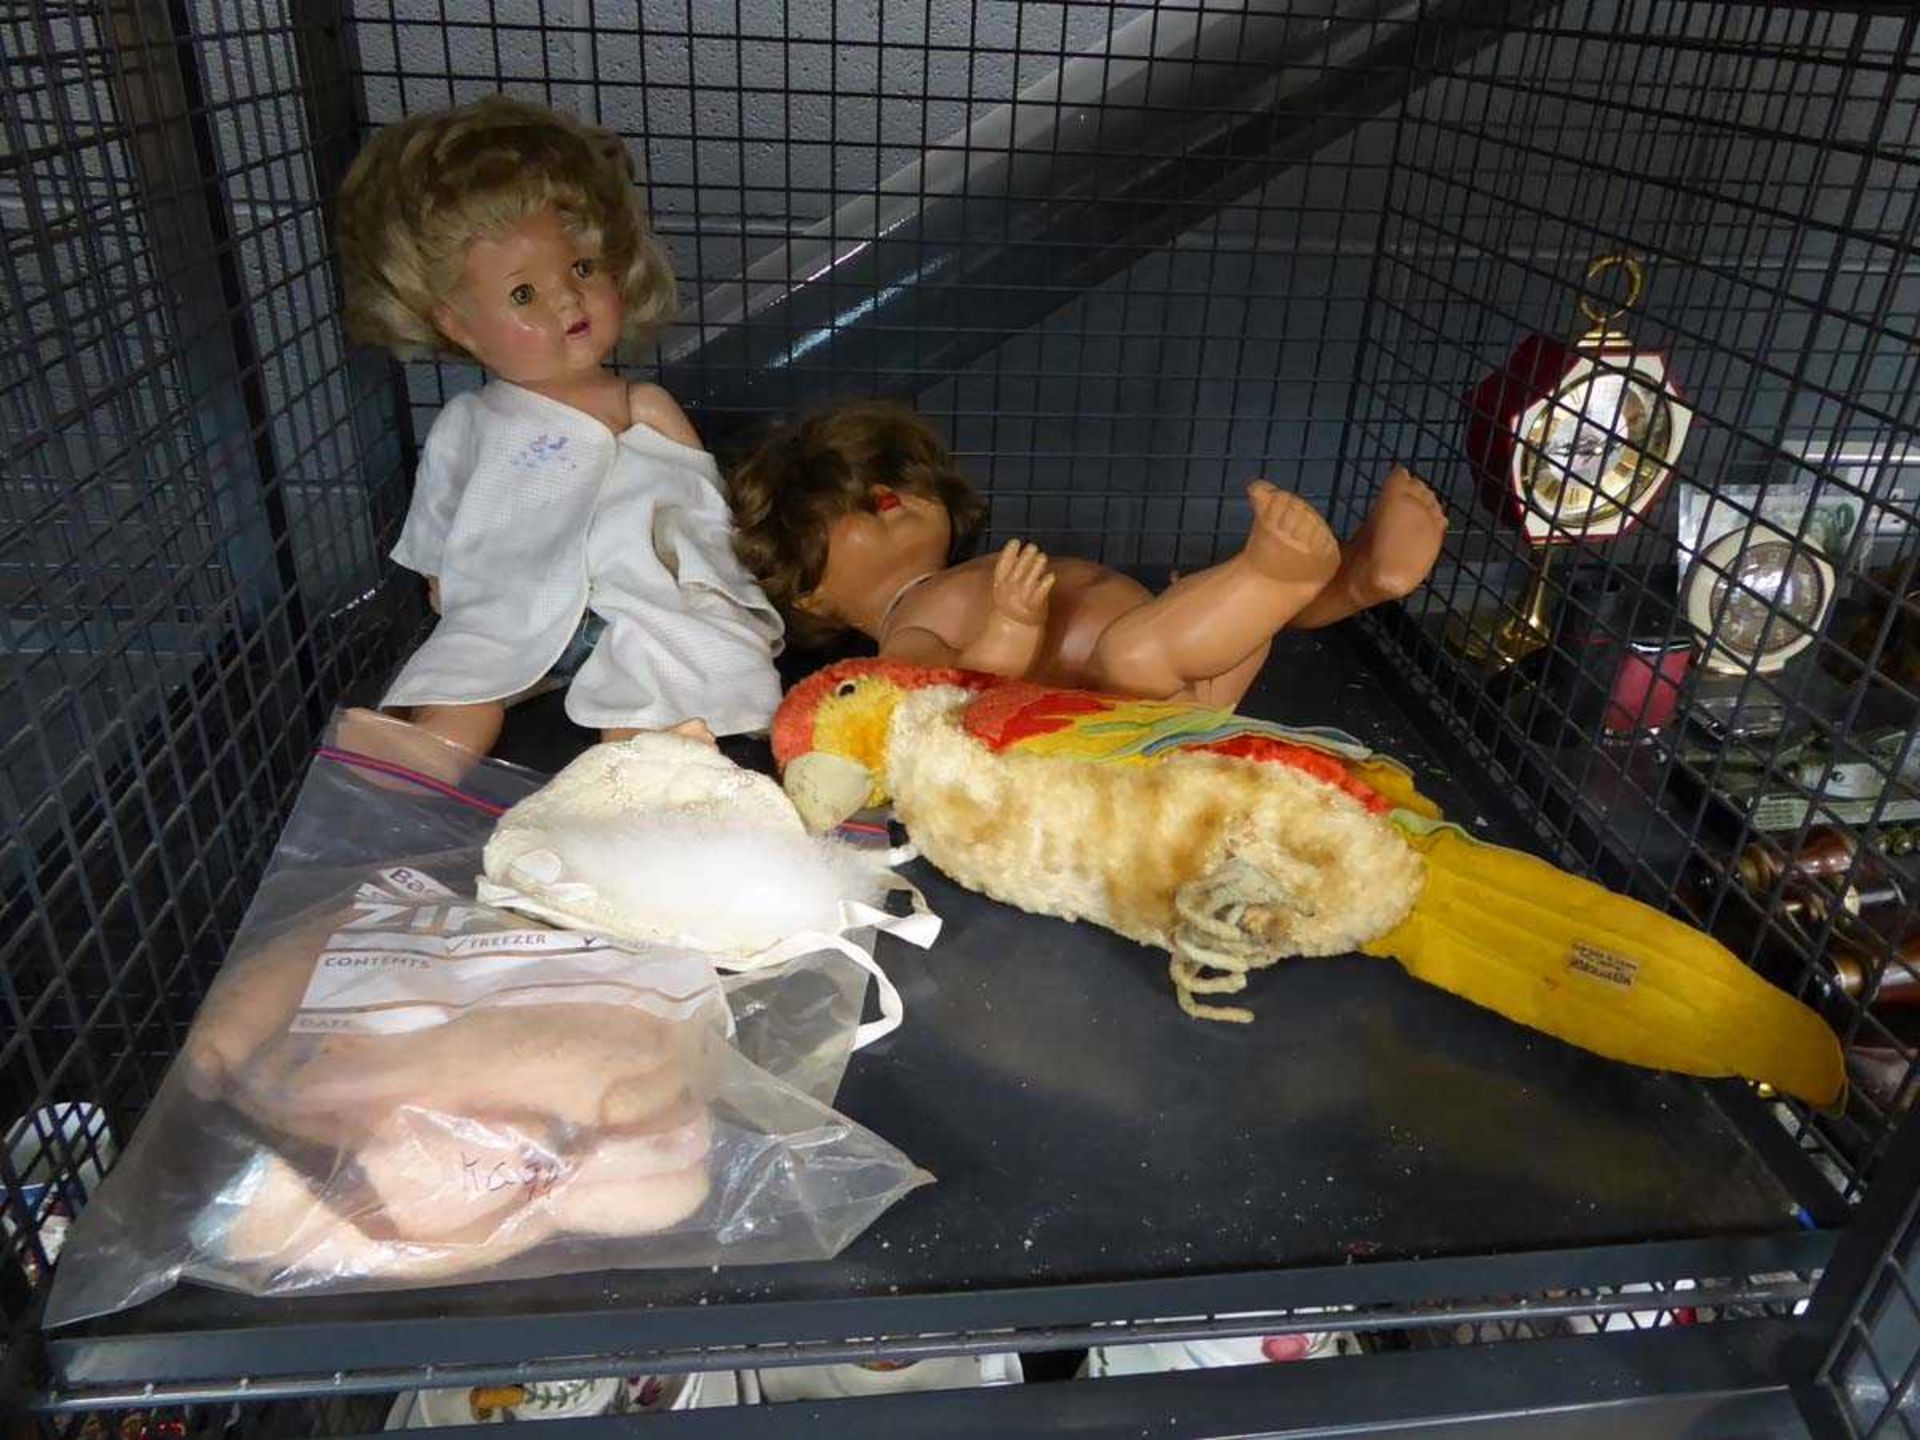 Cage of dolls and fluffy parrot